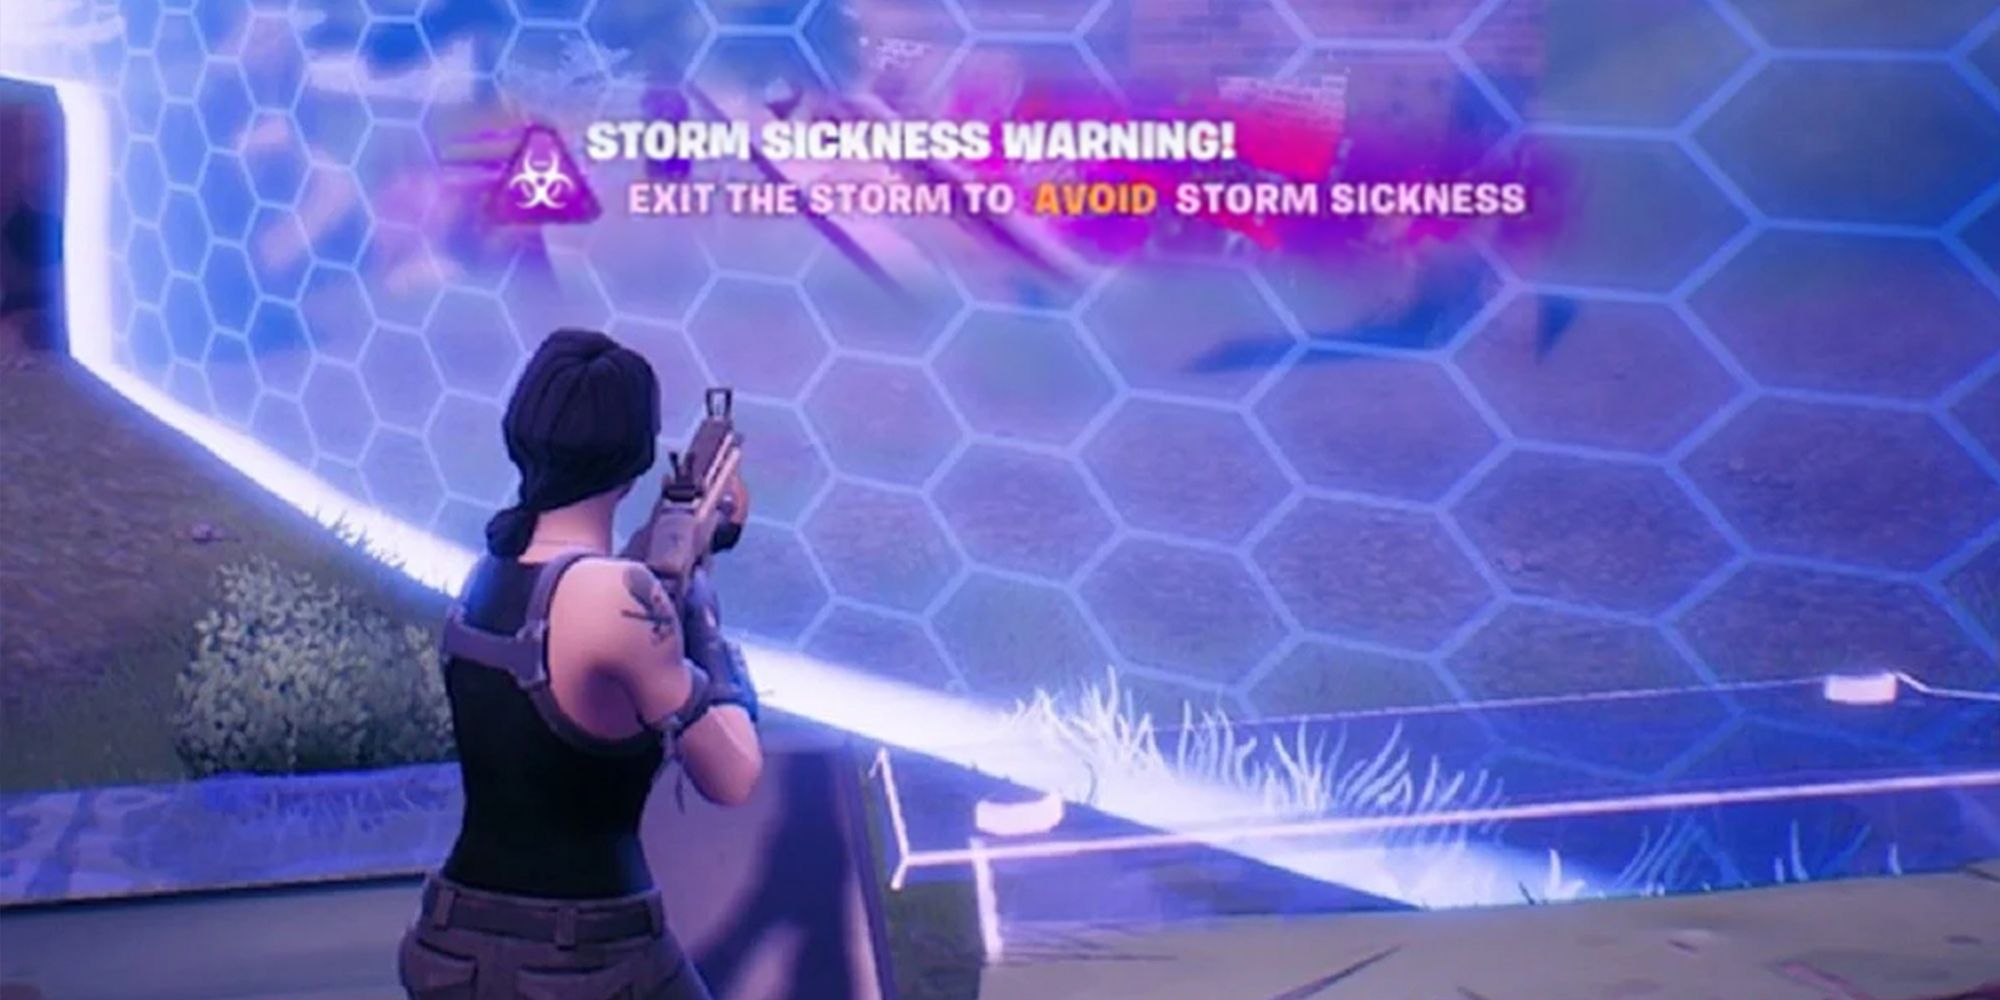 Fortnite - Storm Sickness Warning Overlaid On Image Of Character At Storm Border